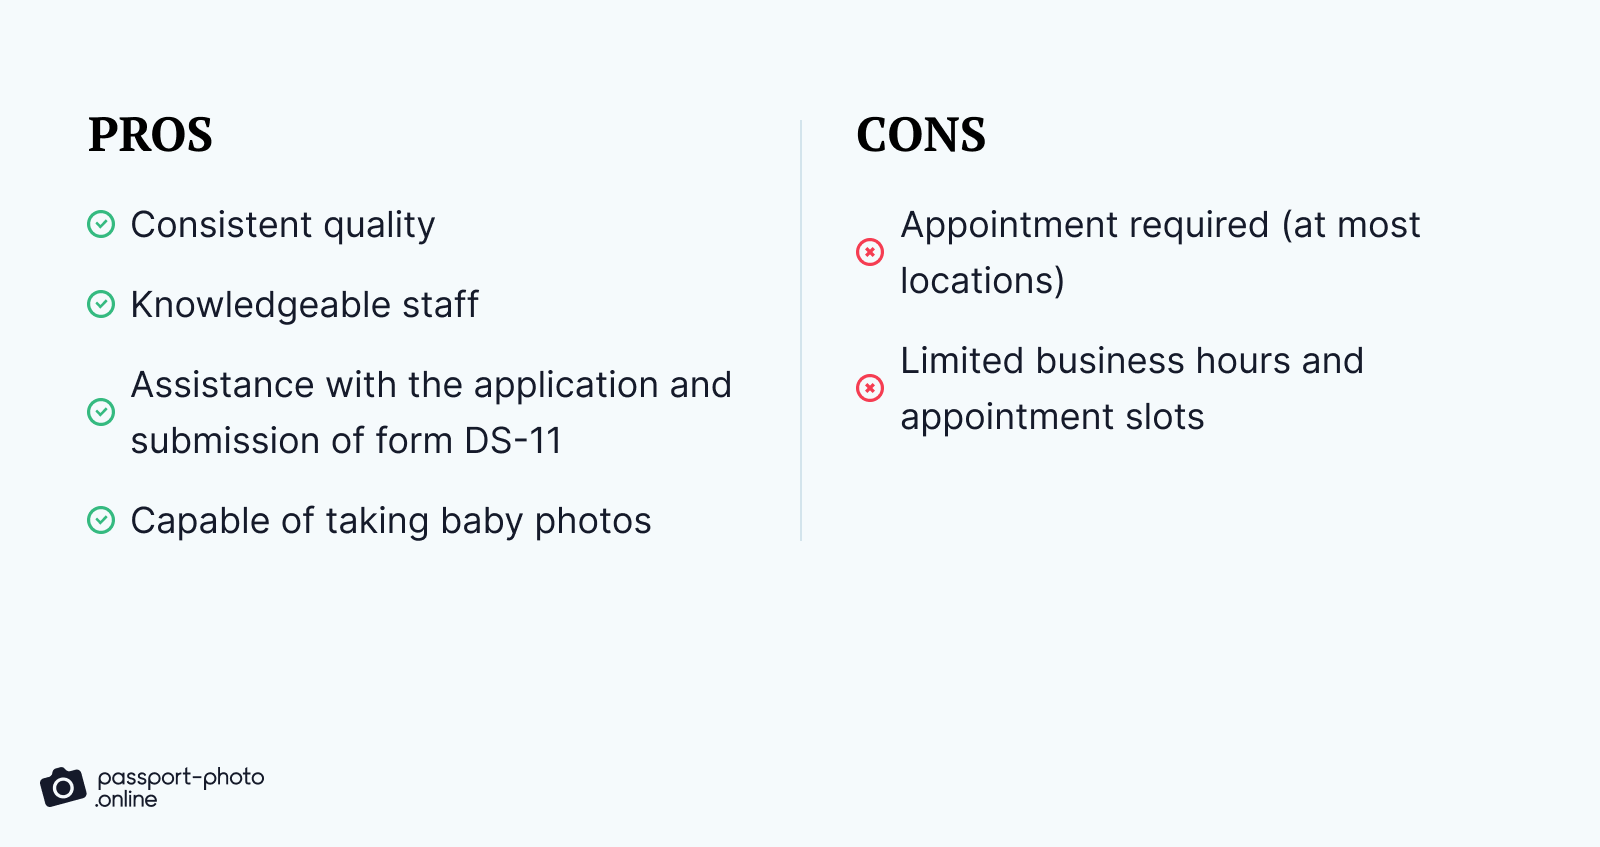 The advantages and disadvantages of getting passport photos done at passport acceptance facilities in a side-by-side list format